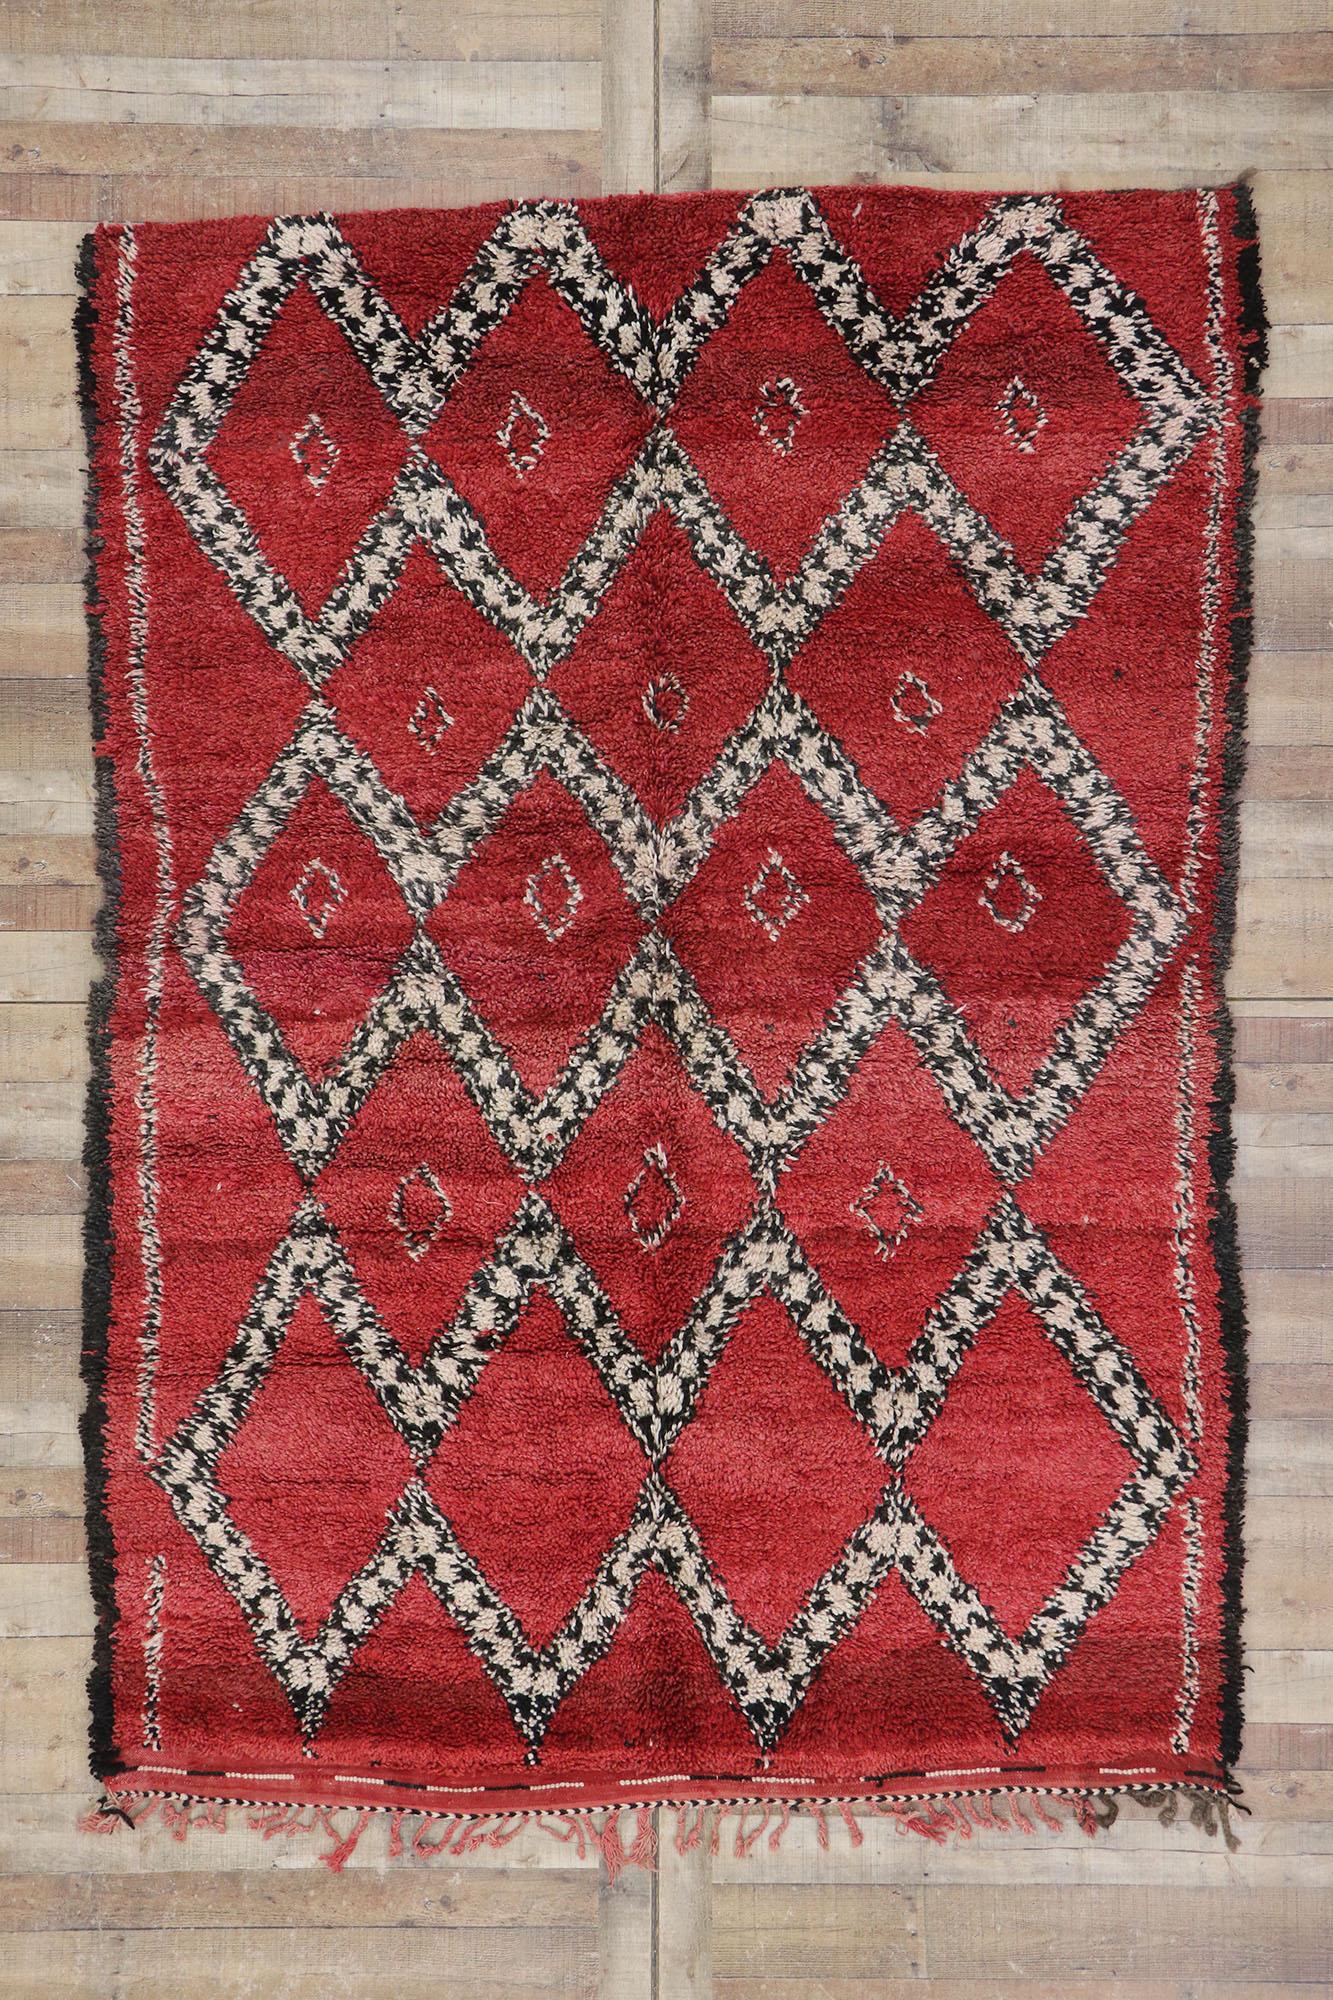 Vintage Moroccan Beni Ourain Rug, Midcentury Meets Boho Chic For Sale 1